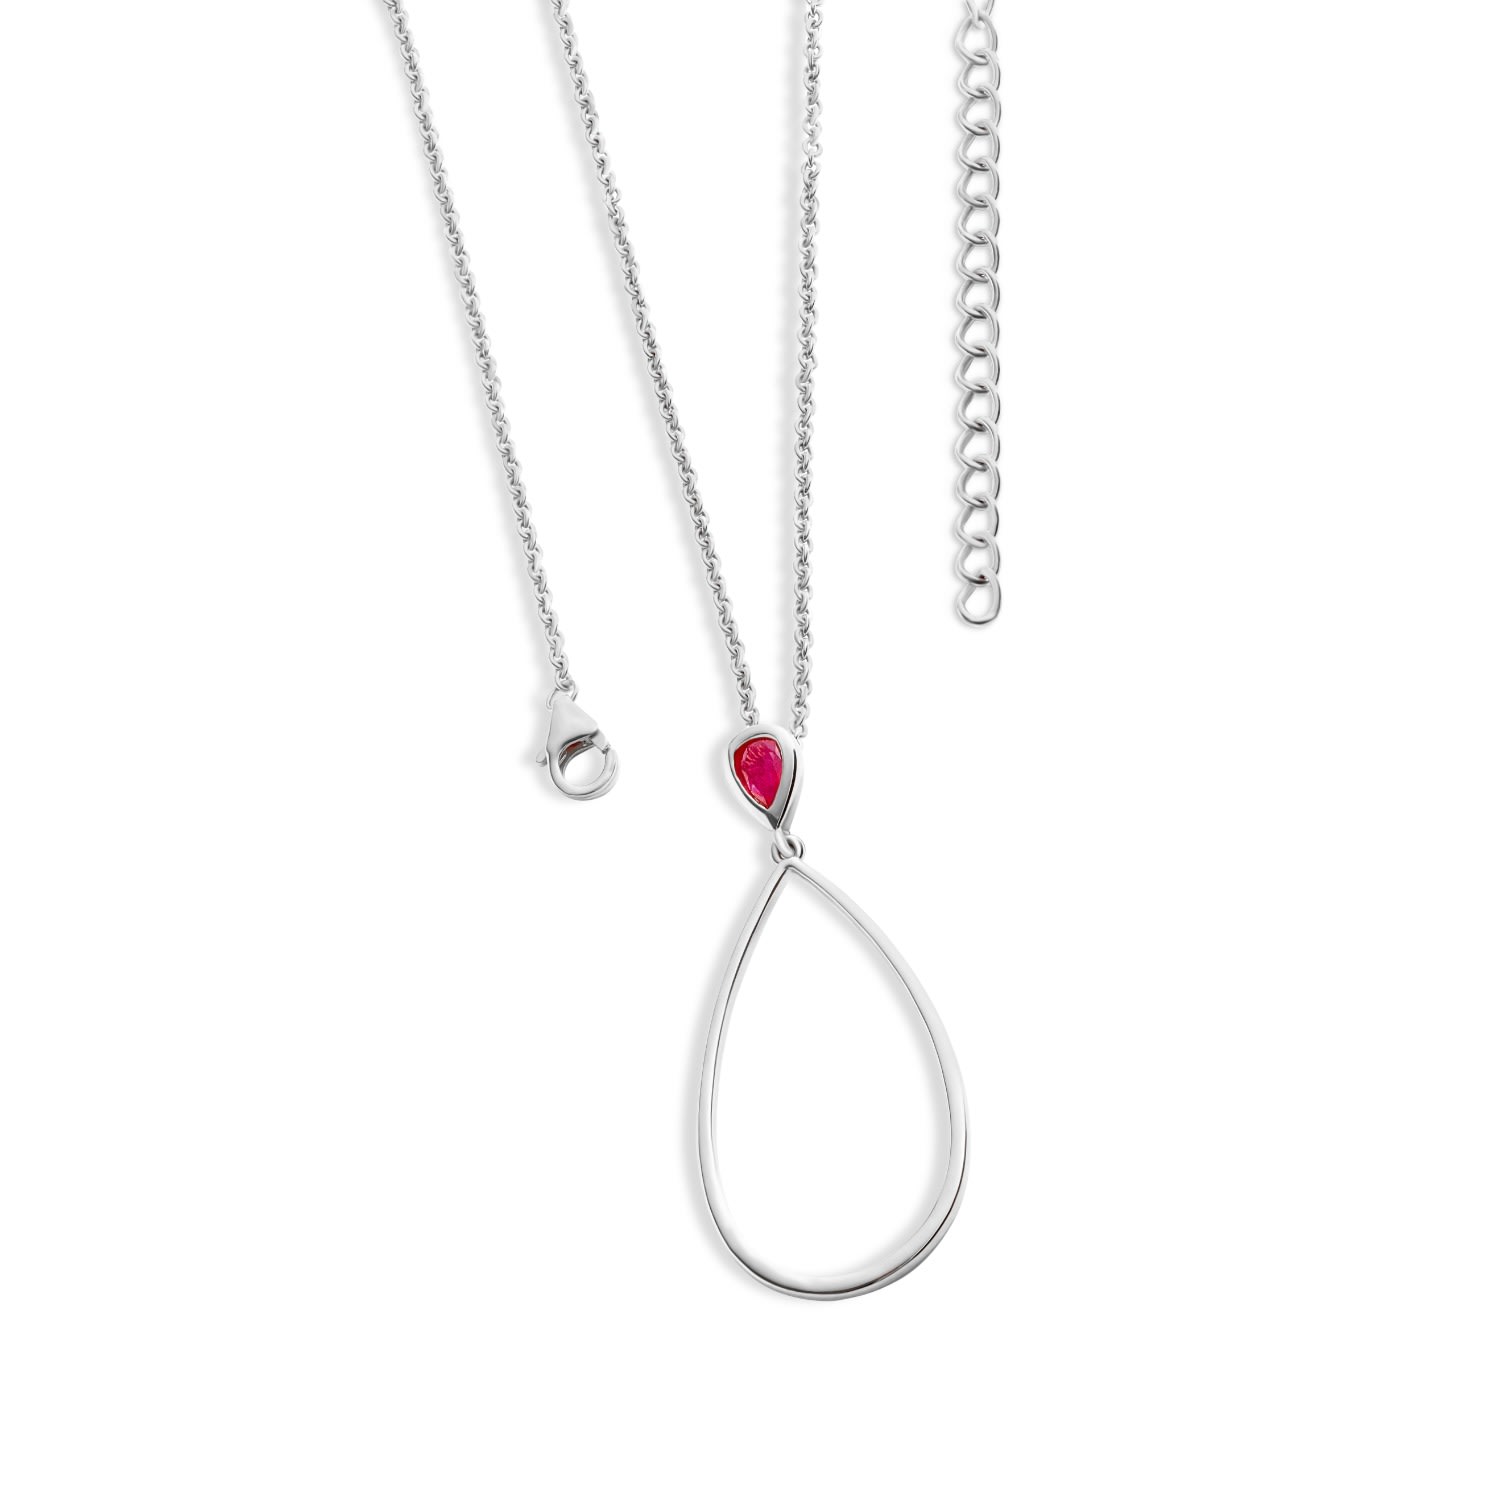 Lucy Quartermaine Women's Silver Long Petal Drop Necklace With Pear Cut Ruby In White